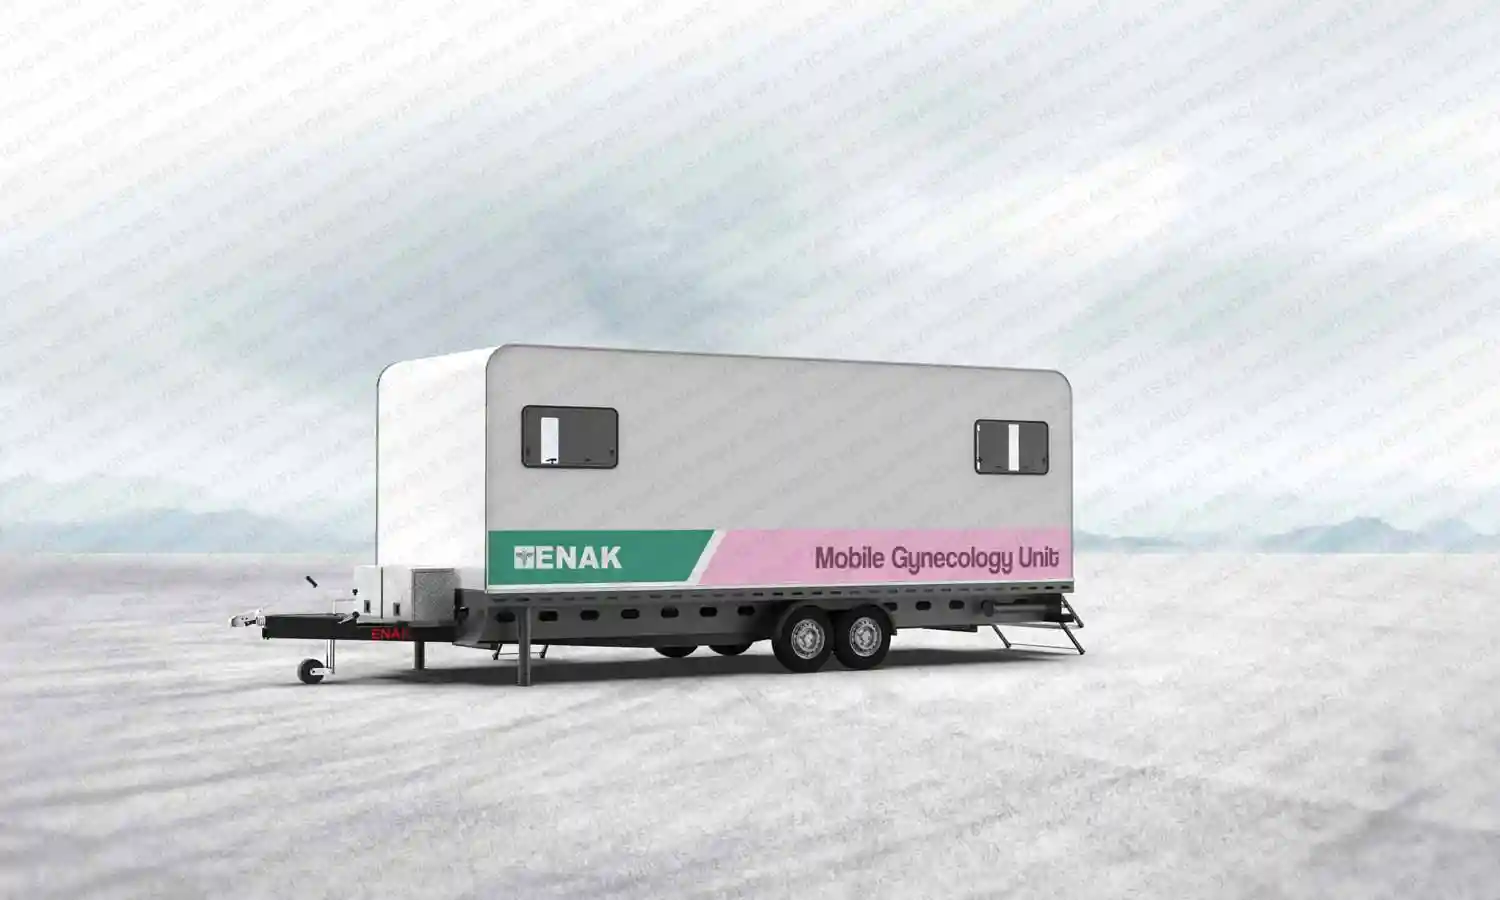 Mobile Gynecology Clinic-Trailer